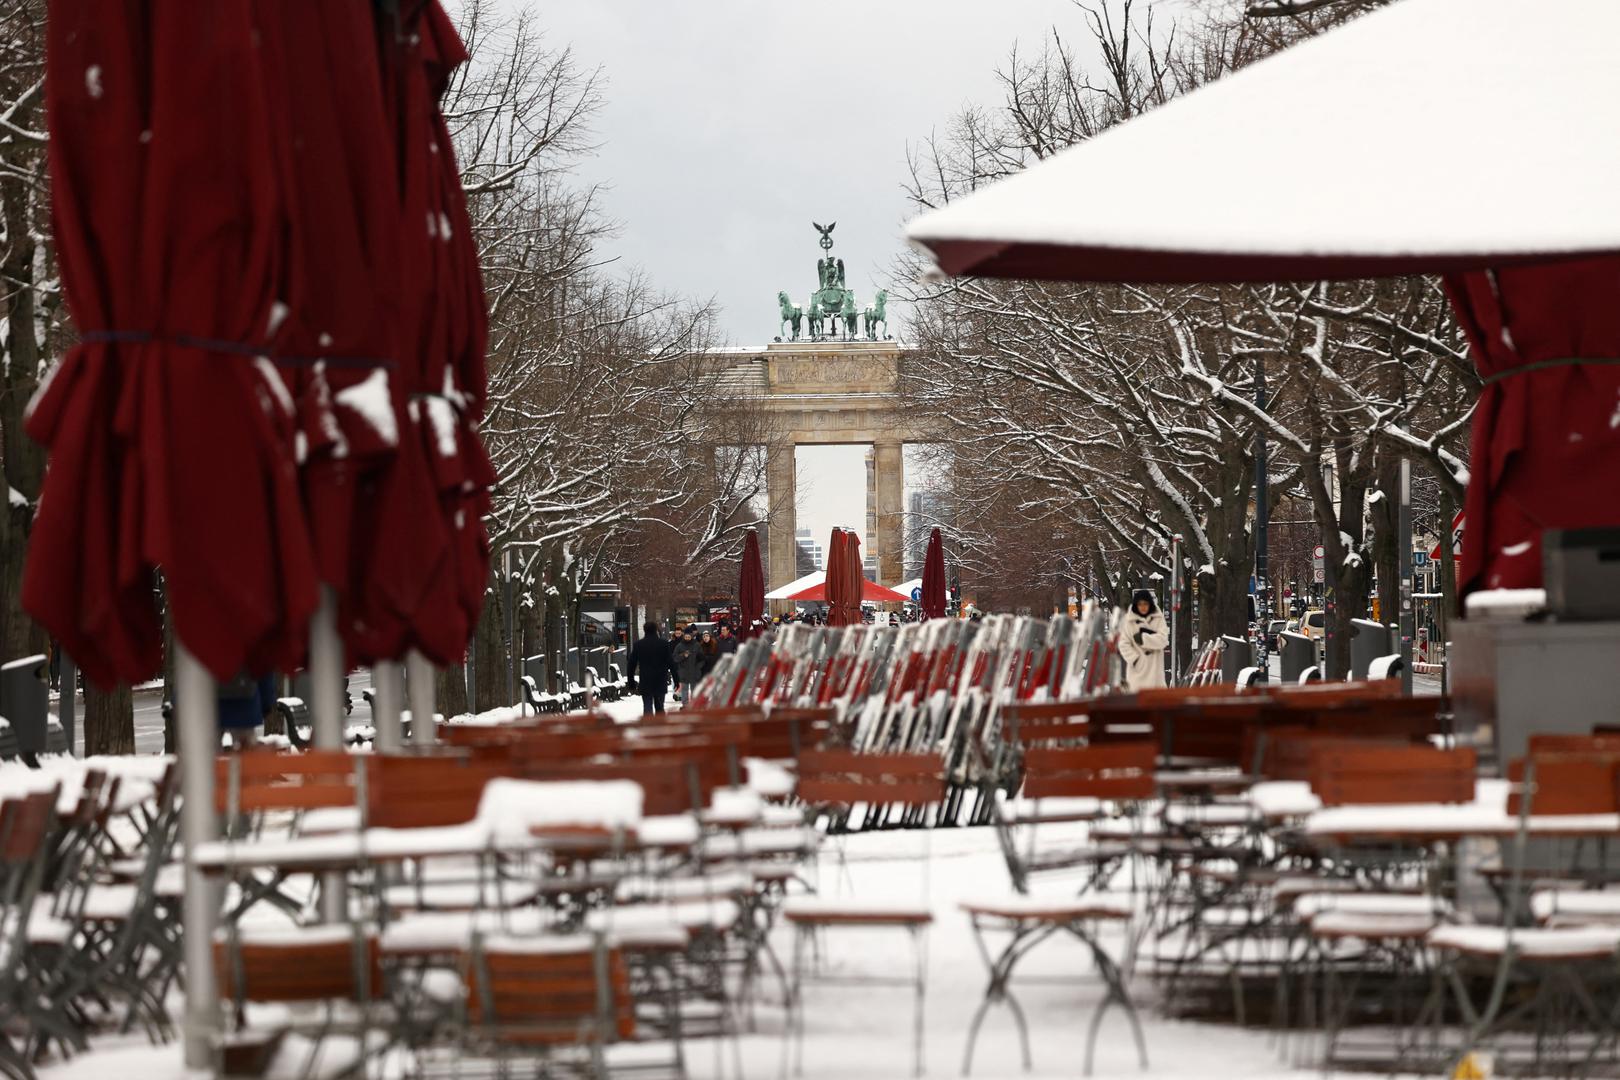 Snow covers the streets and tables near the Brandenburg Gate in Berlin, Germany January 16, 2024. REUTERS/Liesa Johannssen Photo: LIESA JOHANNSSEN/REUTERS